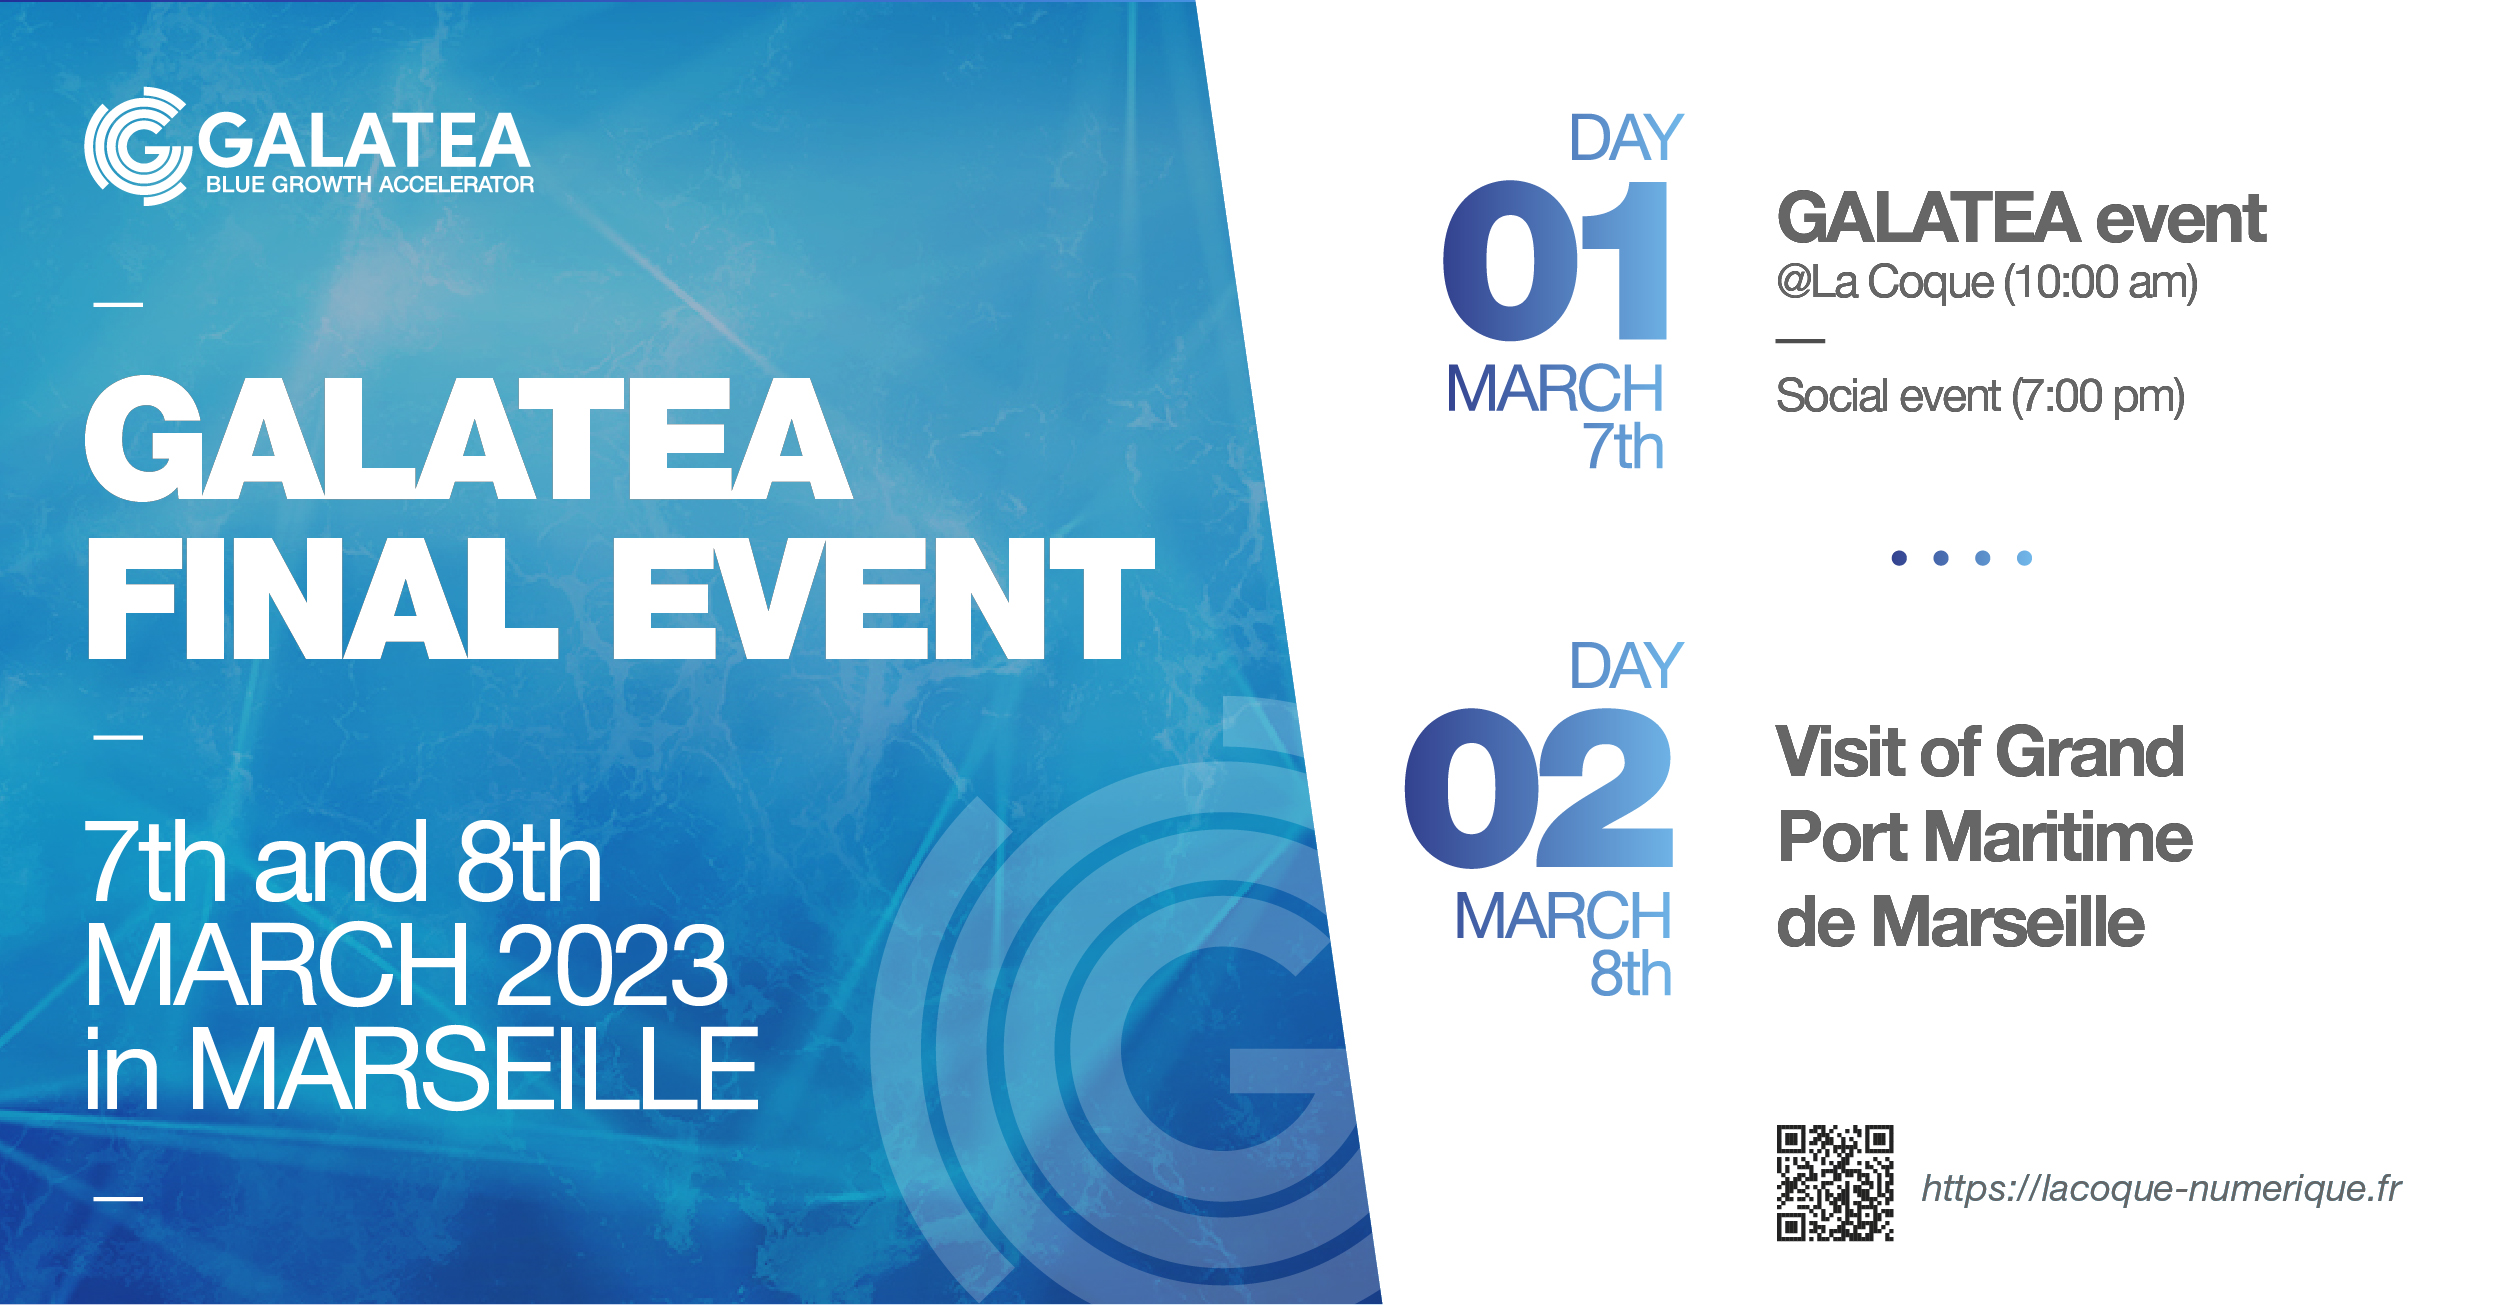 GALATEA Final Event: 7th and 8th March in Marseille